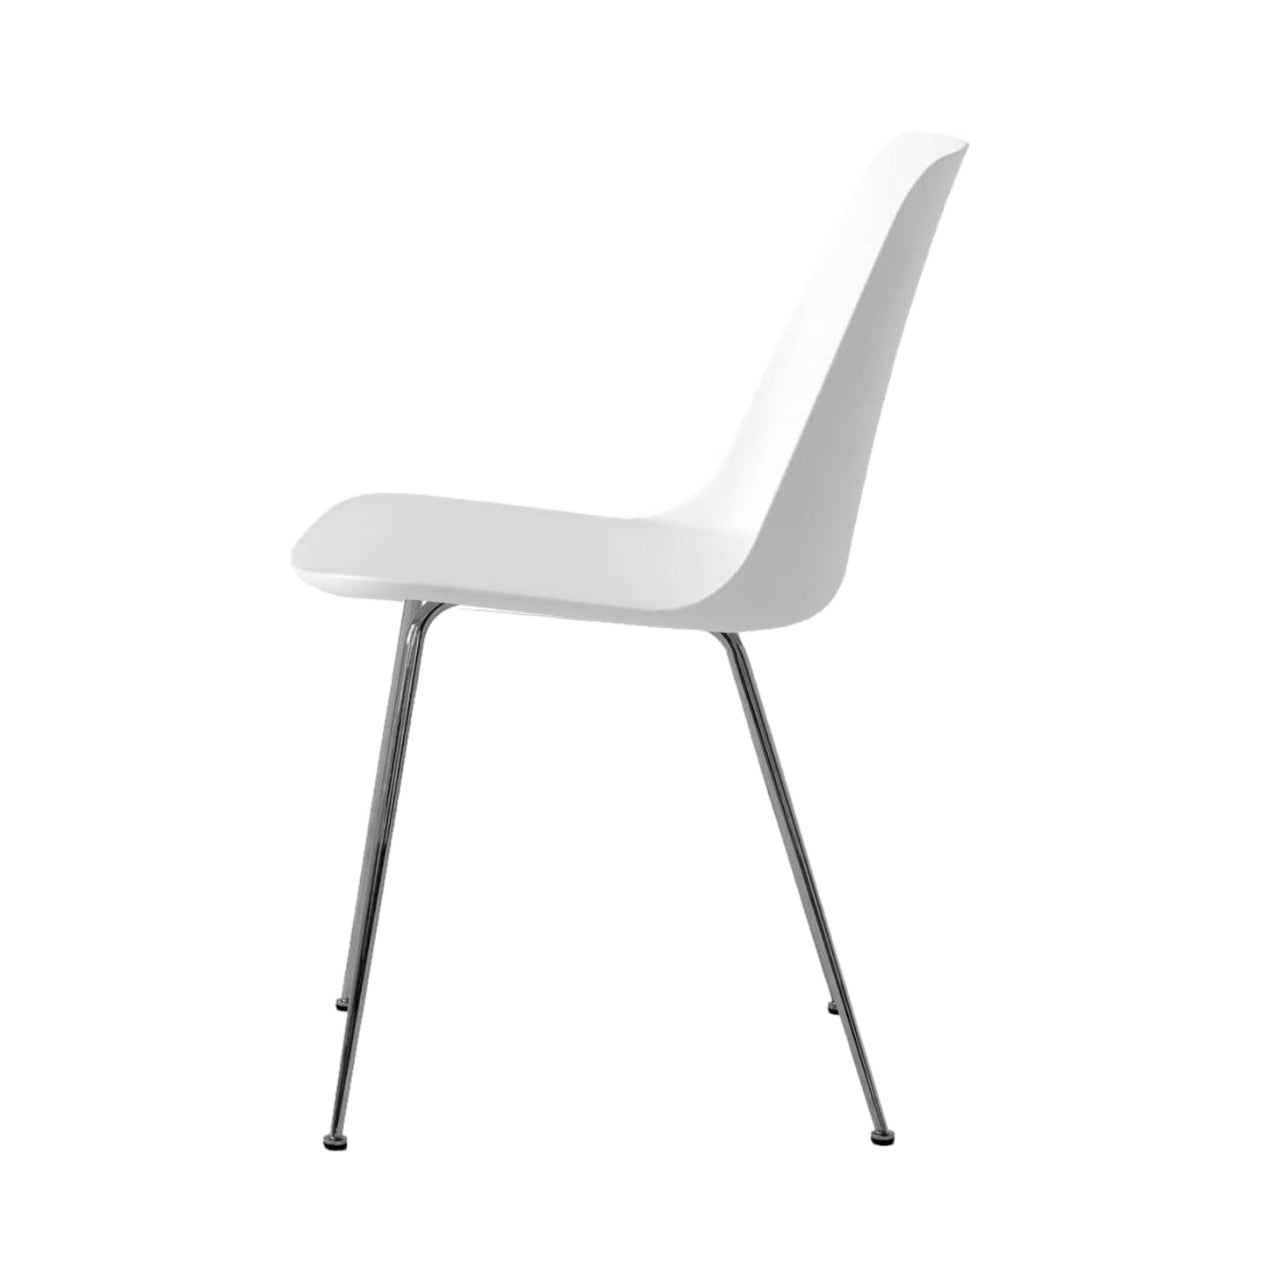 Rely Chair HW6: White + Chrome